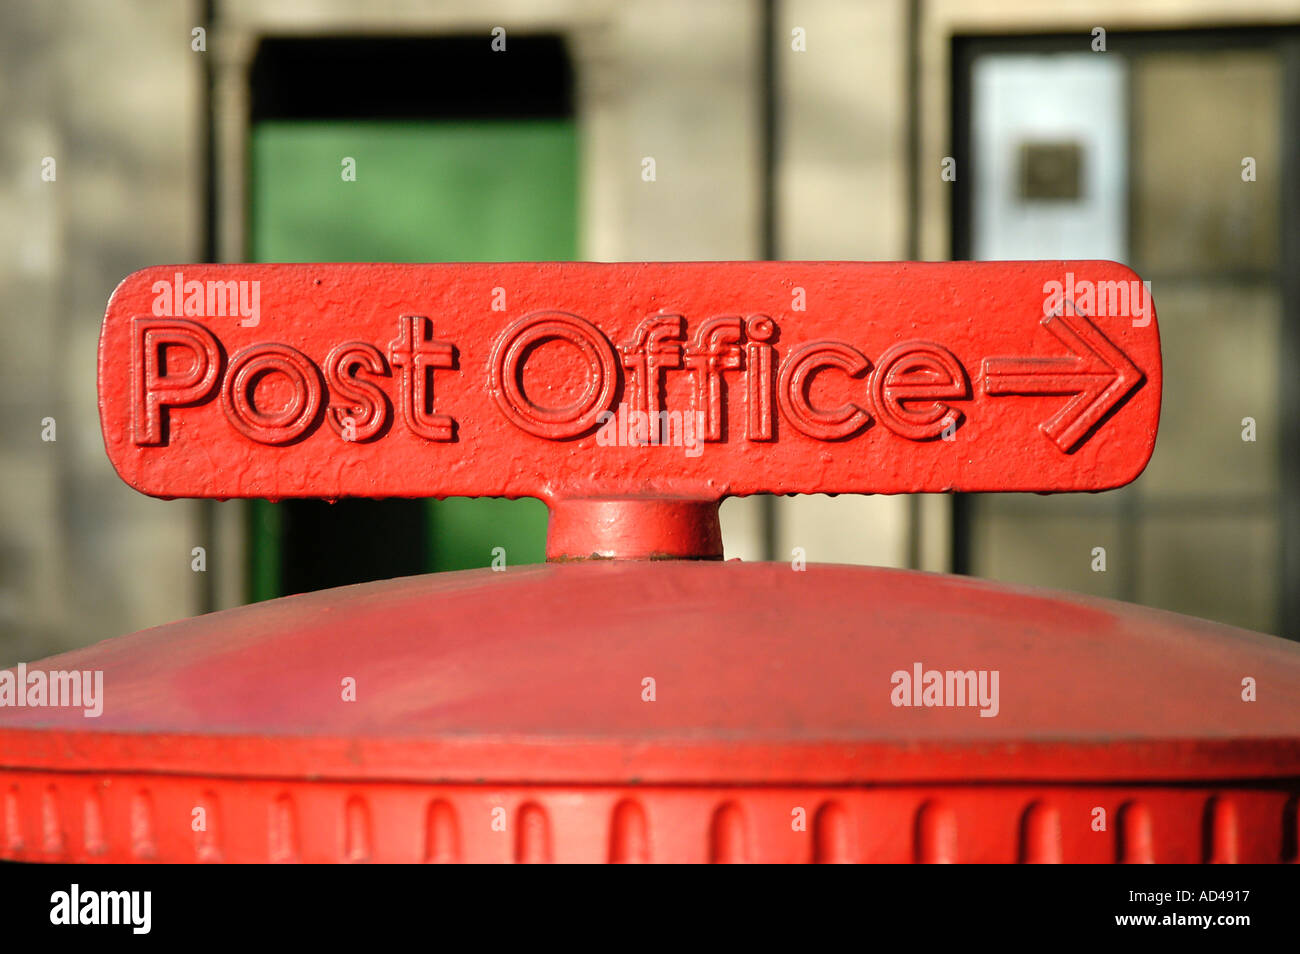 Post Office sign on red post box, England, UK Stock Photo